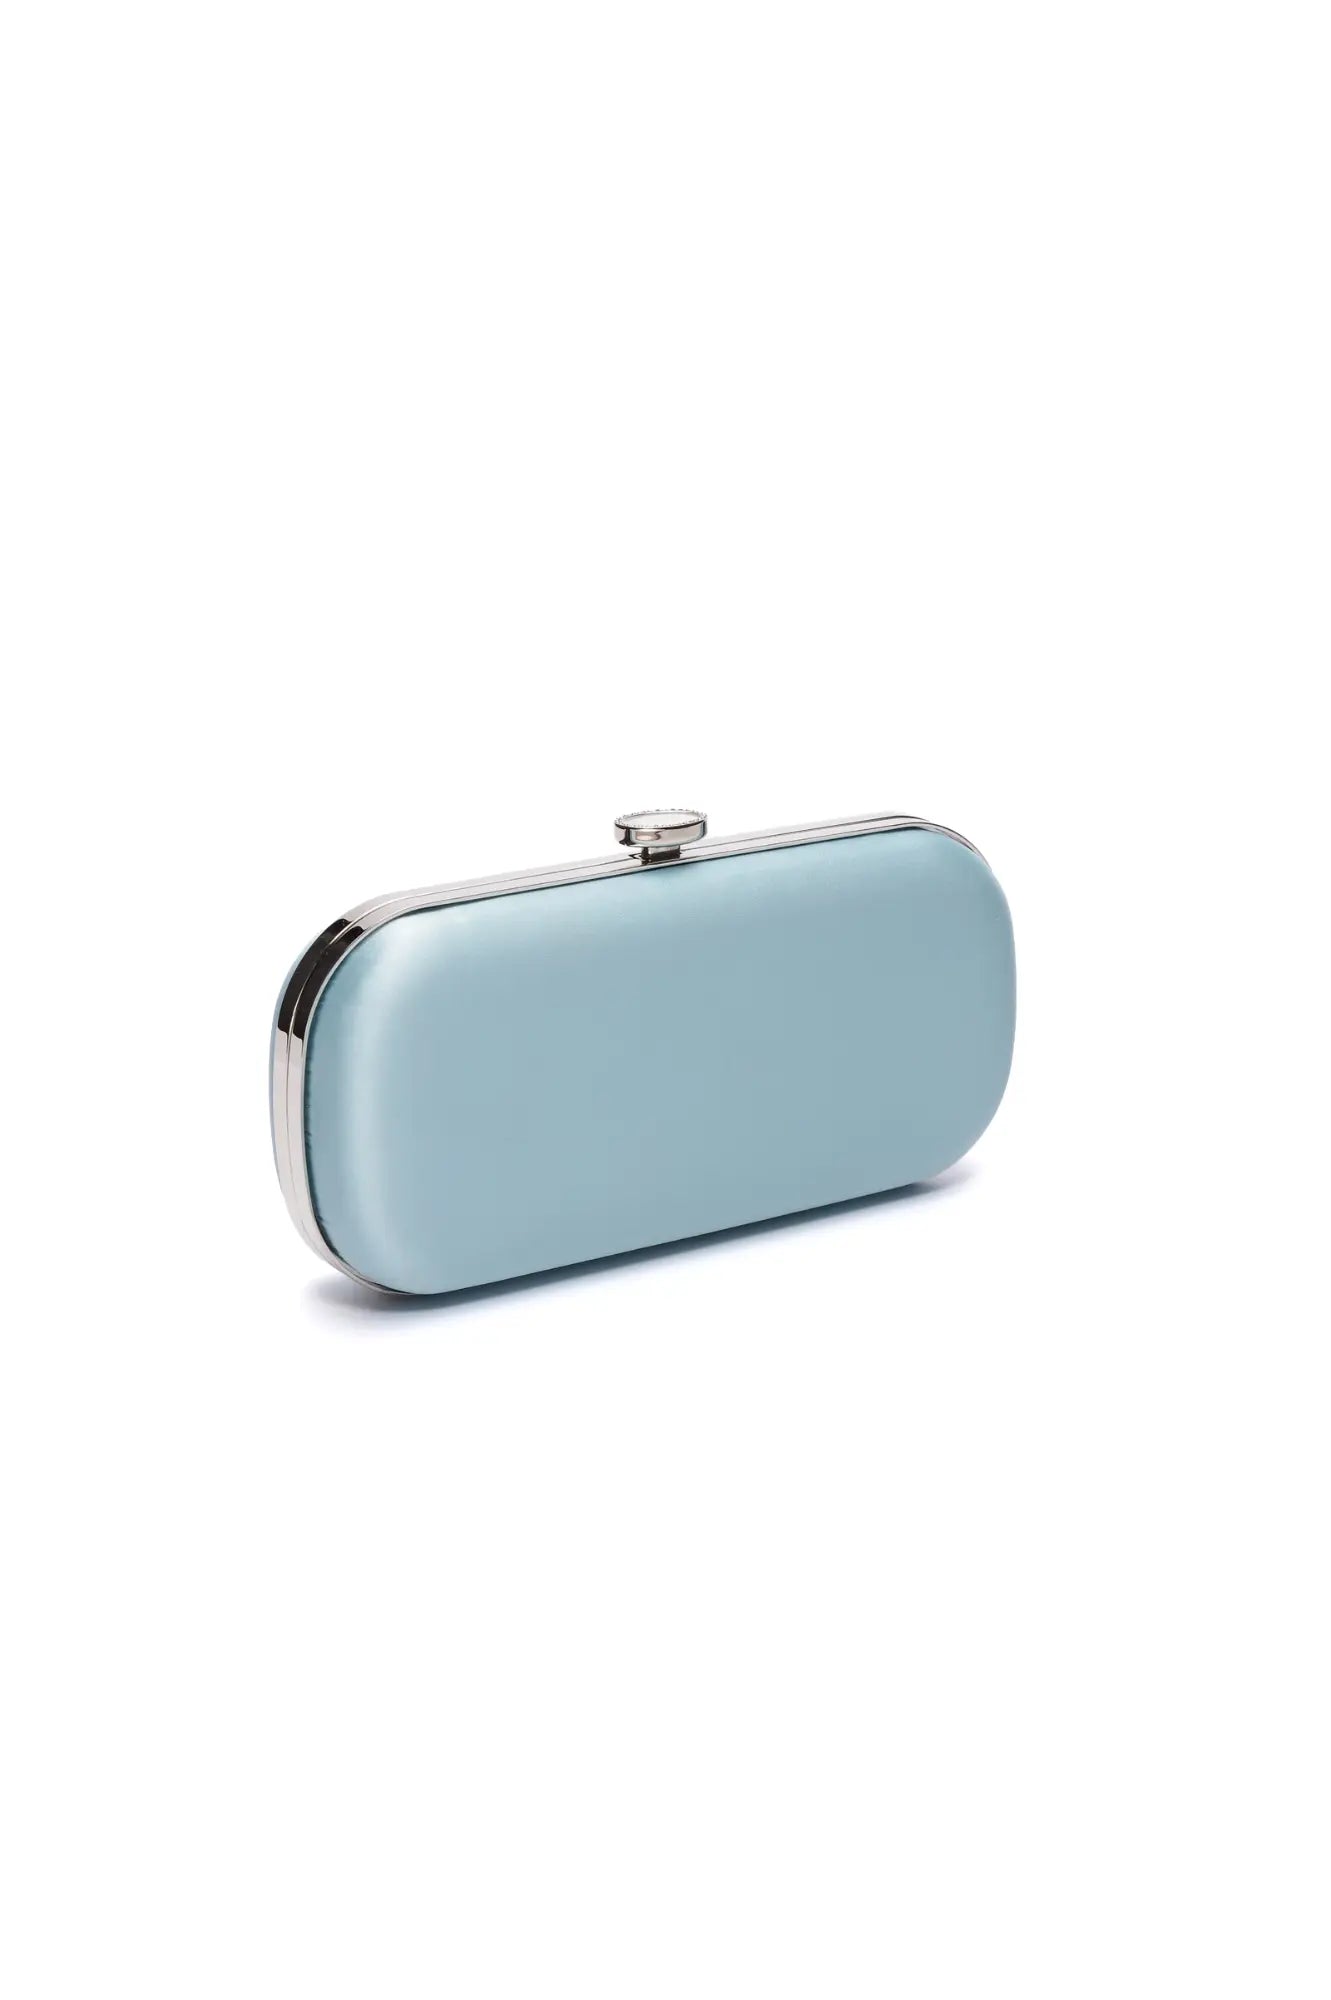 Light blue "Bella Clutch Cinderella Blue Petite" purse with metallic clasp on a white background, designed as a custom wedding accessory by The Bella Rosa Collection.